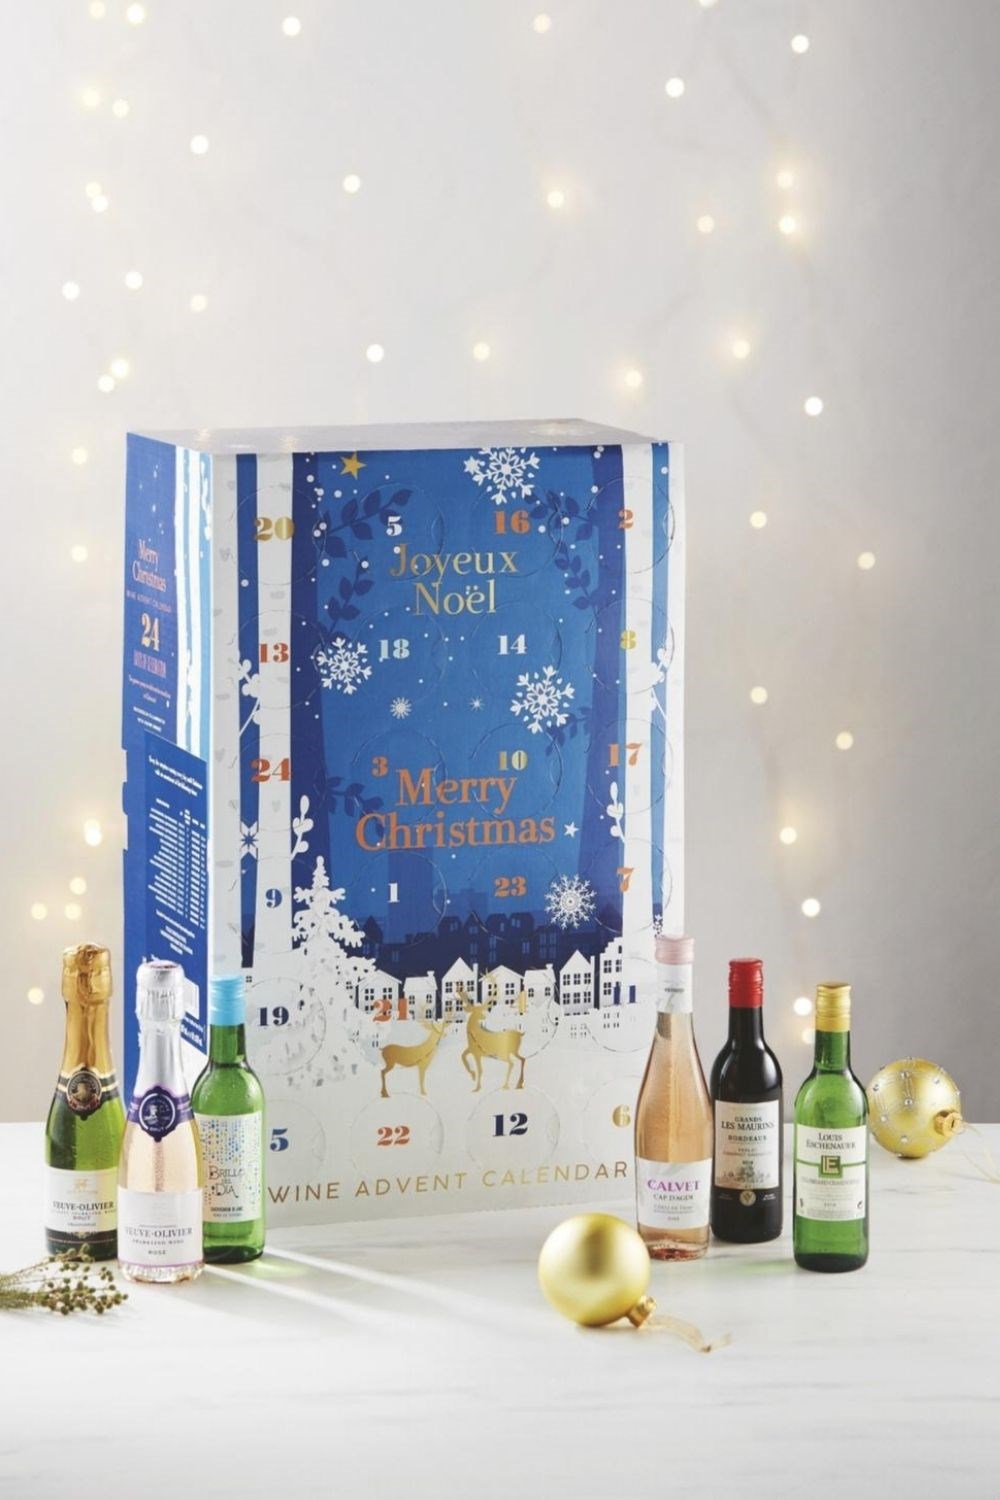 The Aldi wine Advent calendars have arrived | Better Homes and Gardens